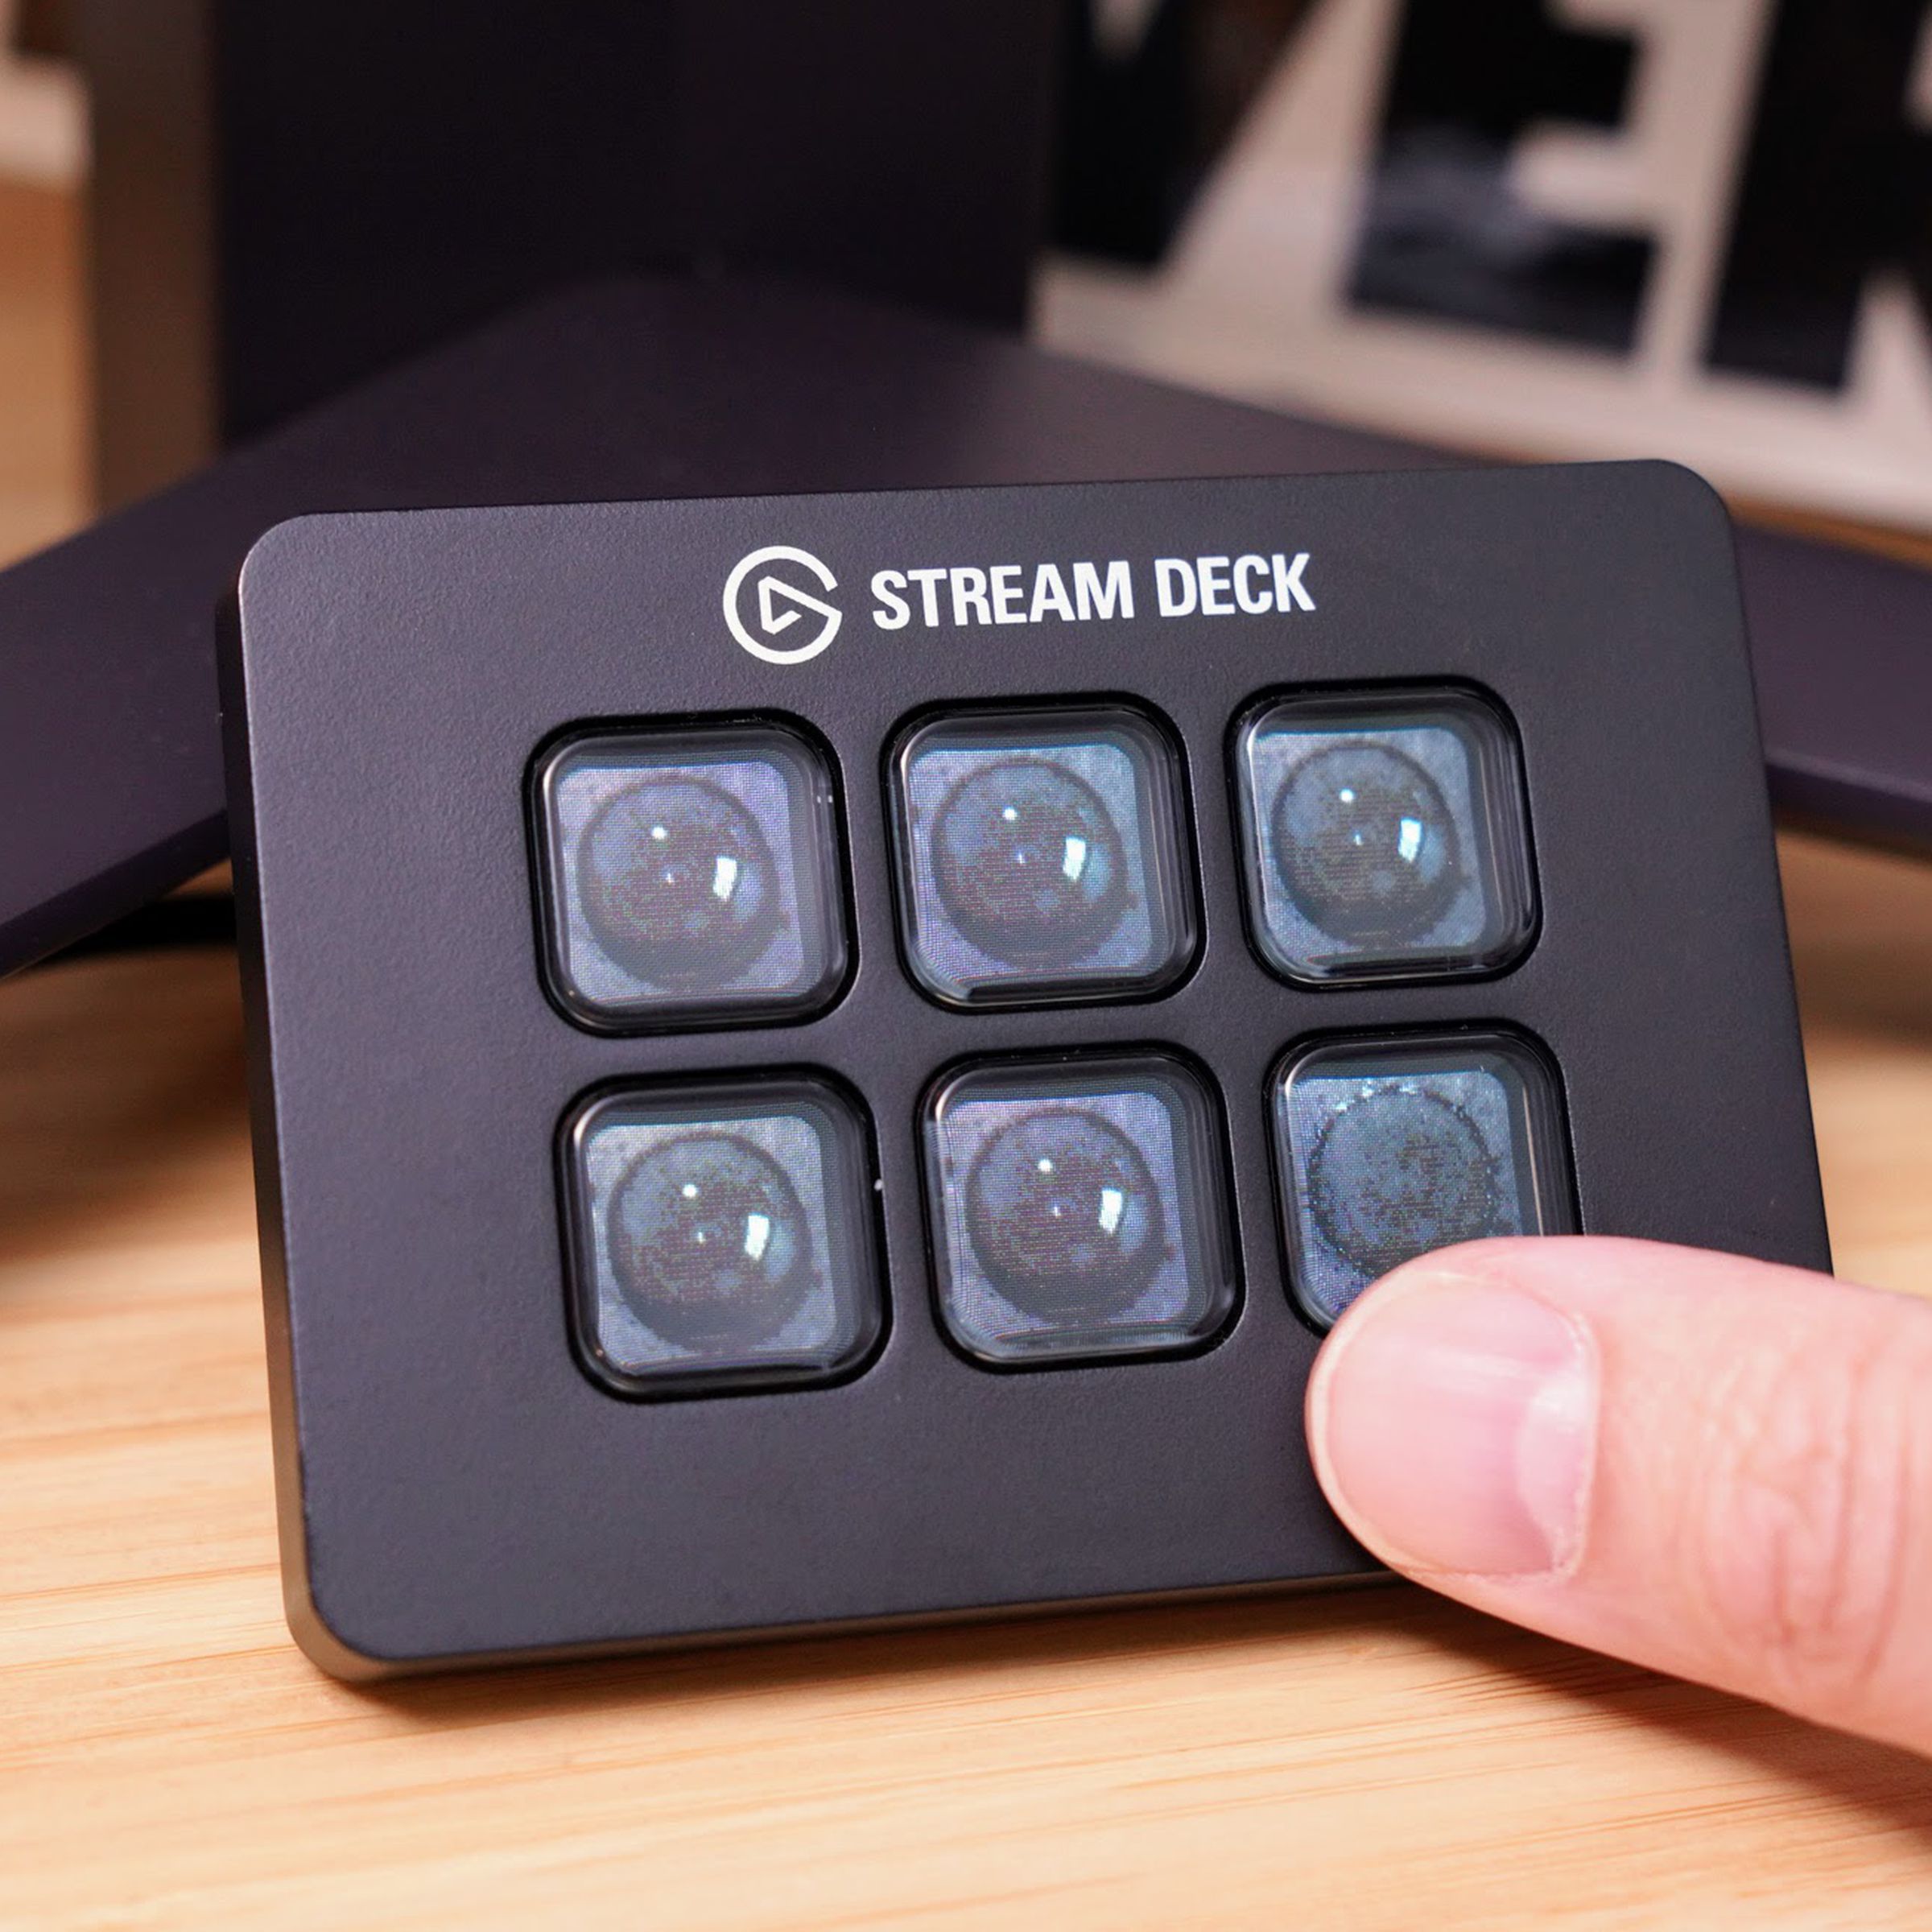 A Stream Deck filled with six LCD keys each filled with bubbles to pop